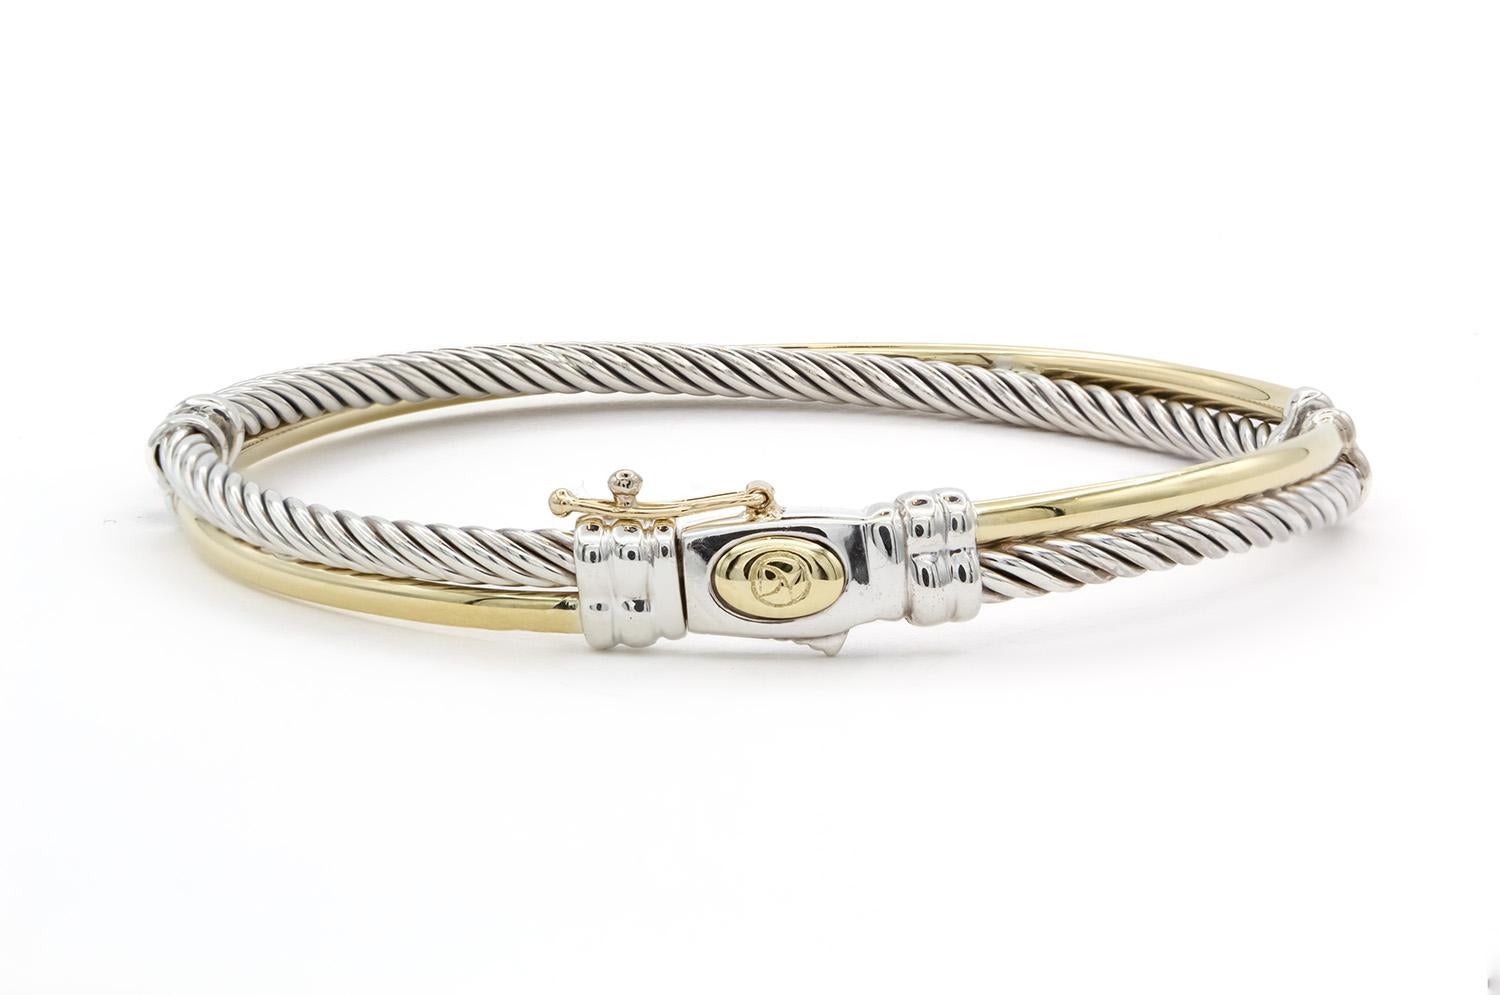 We are pleased to offer this David Yurman Linked Crossover Cable Bracelet. This bracelet features David Yurmans classic cable design with a twist! Fashioned from sterling silver & 18k yellow gold the bracelet measures 5mm wide and will fit up to a